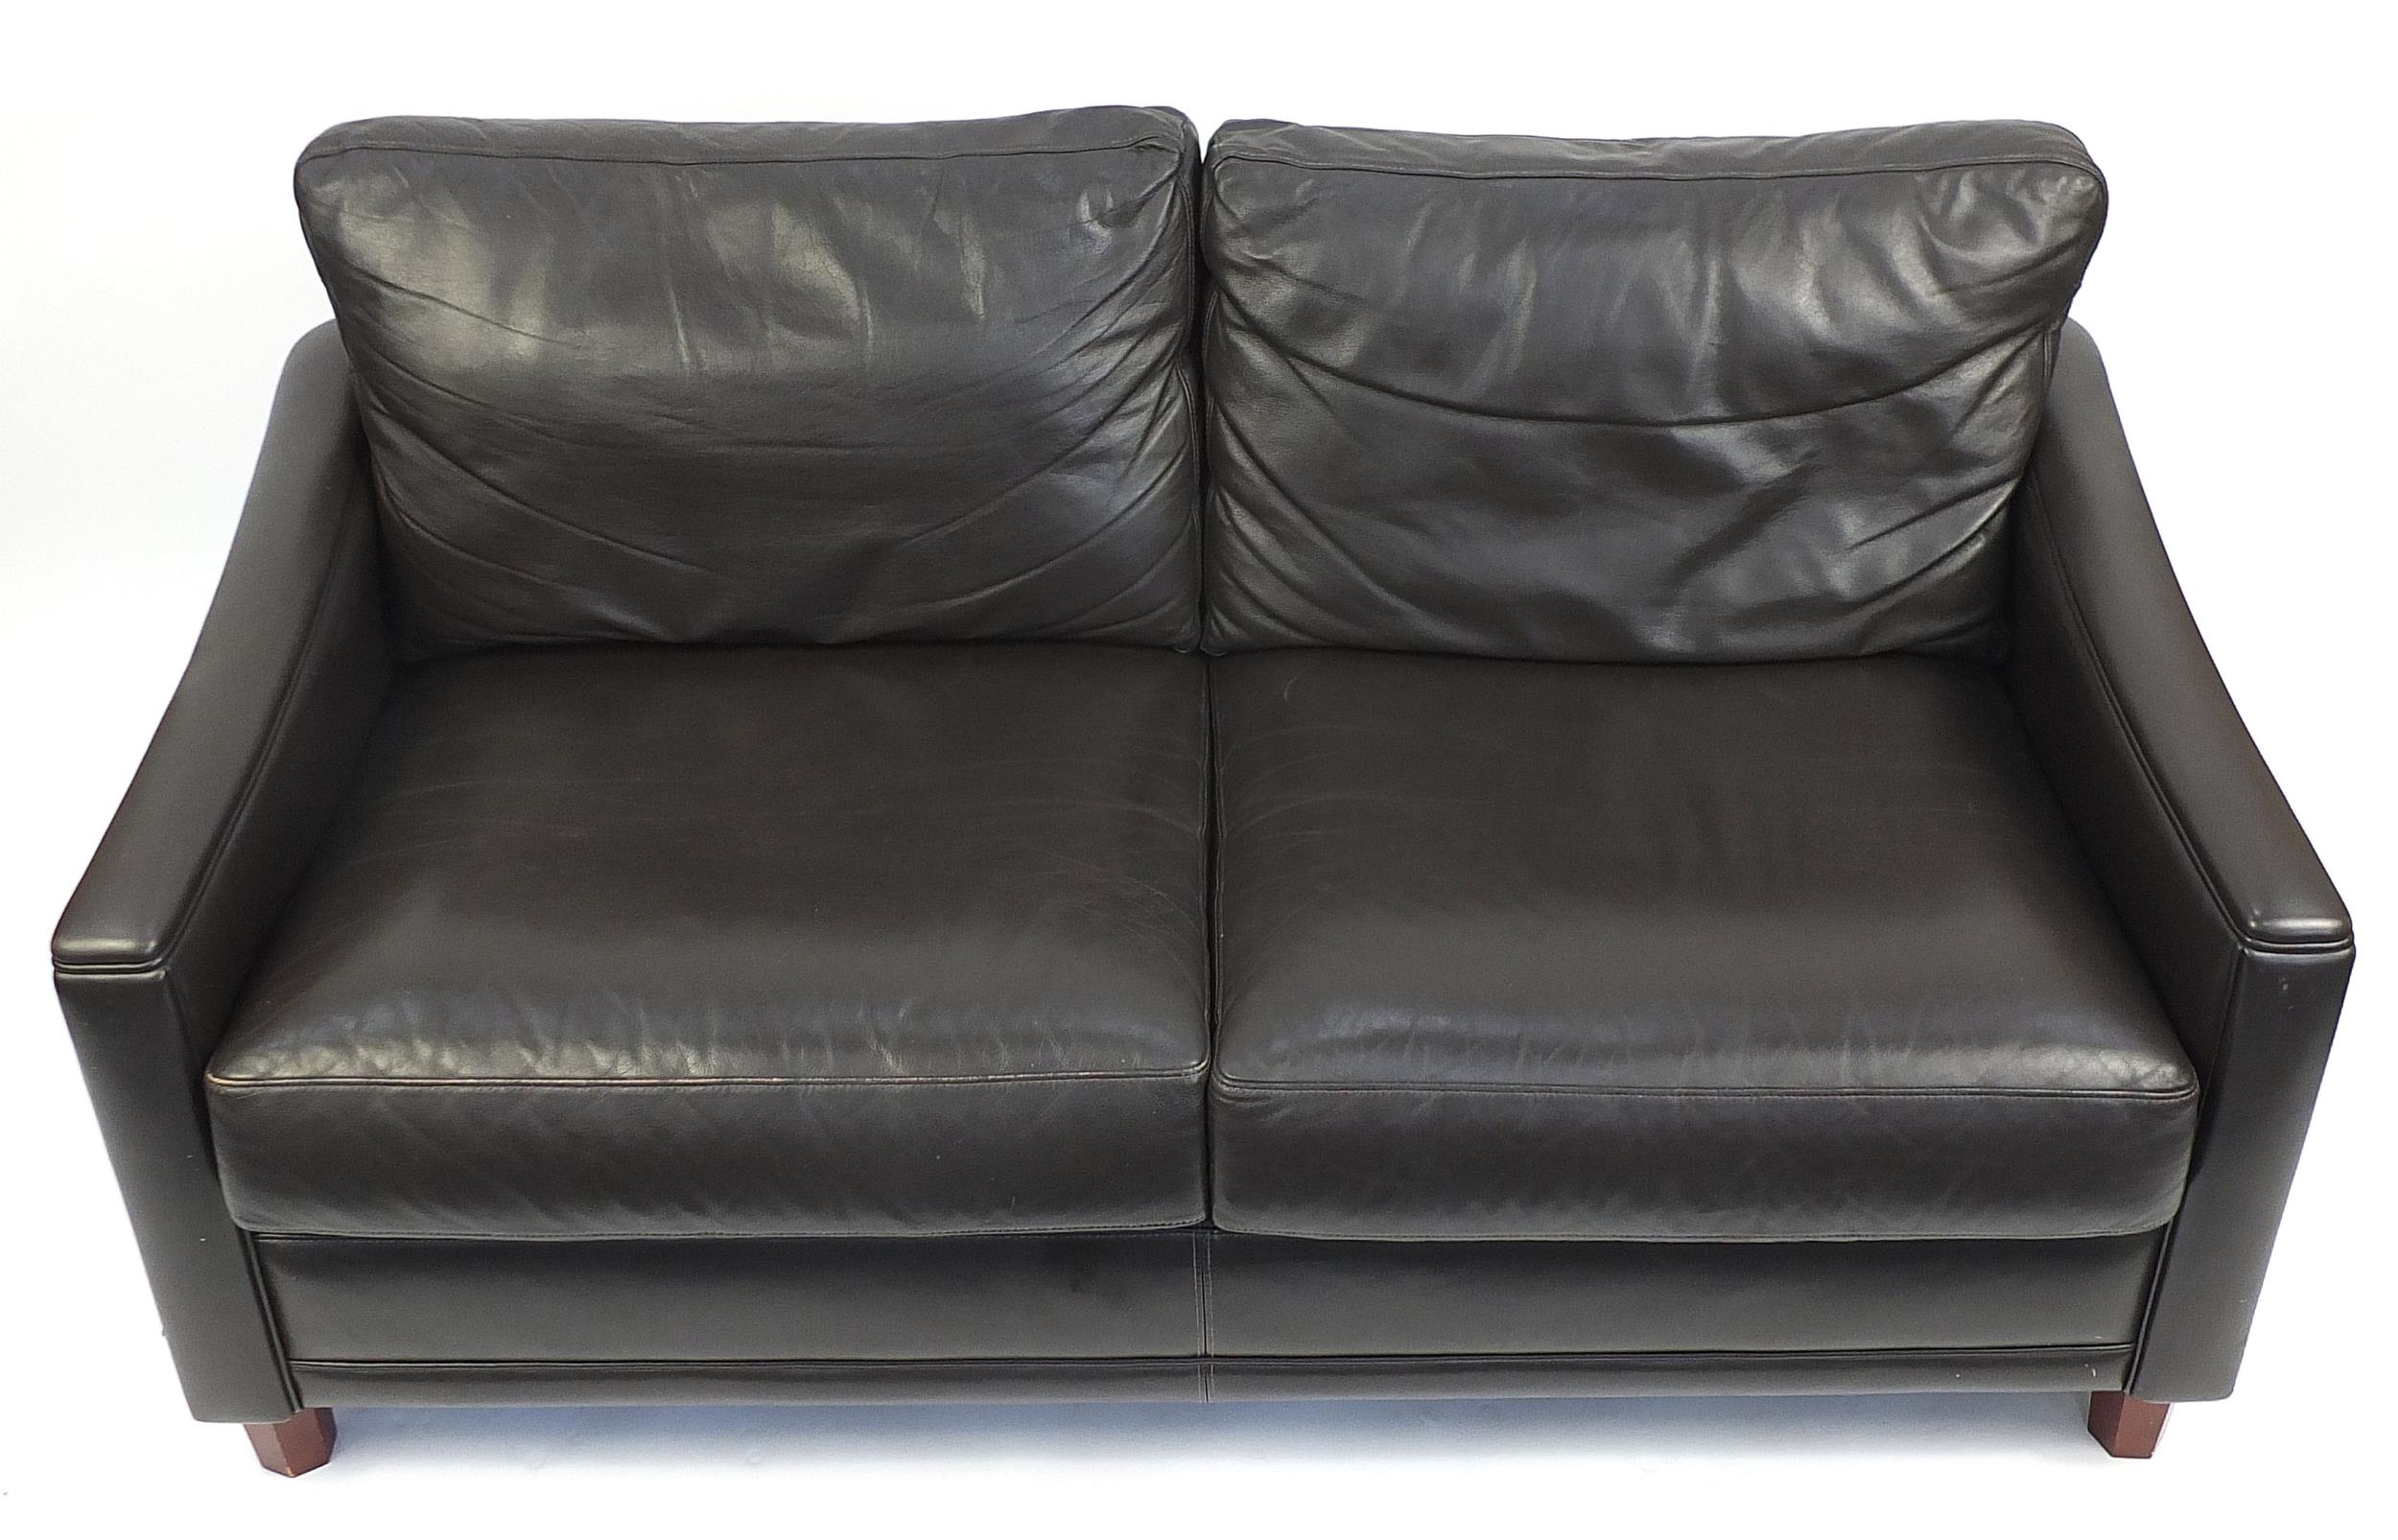 Brown leather two seater sofa, 160cm wide - Image 2 of 3